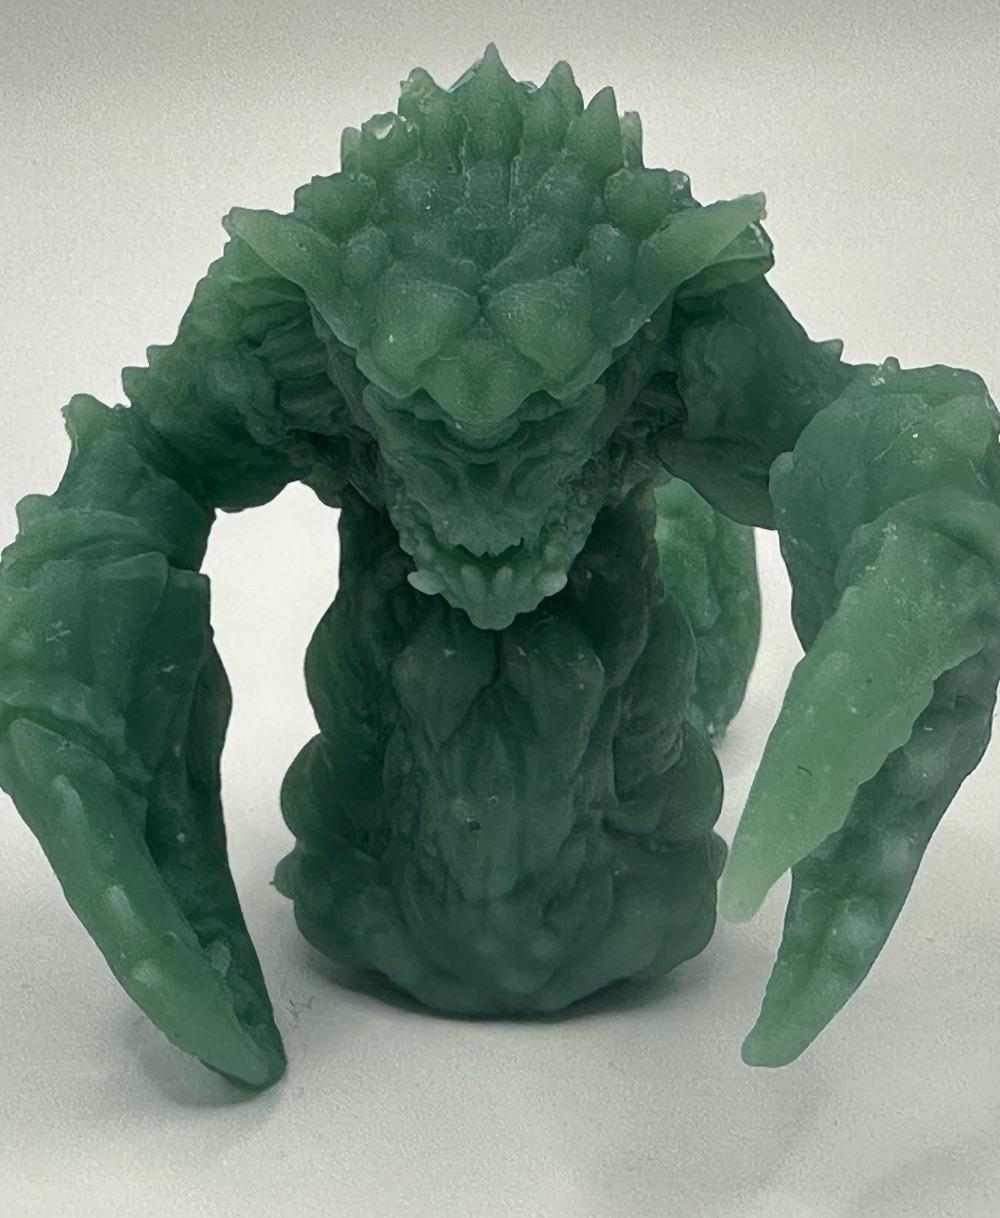 Astral Dreadnorght - Monsters of the Multiverse PRESUPPORTED - Illustrated and Stats - 32mm scale			 3d model